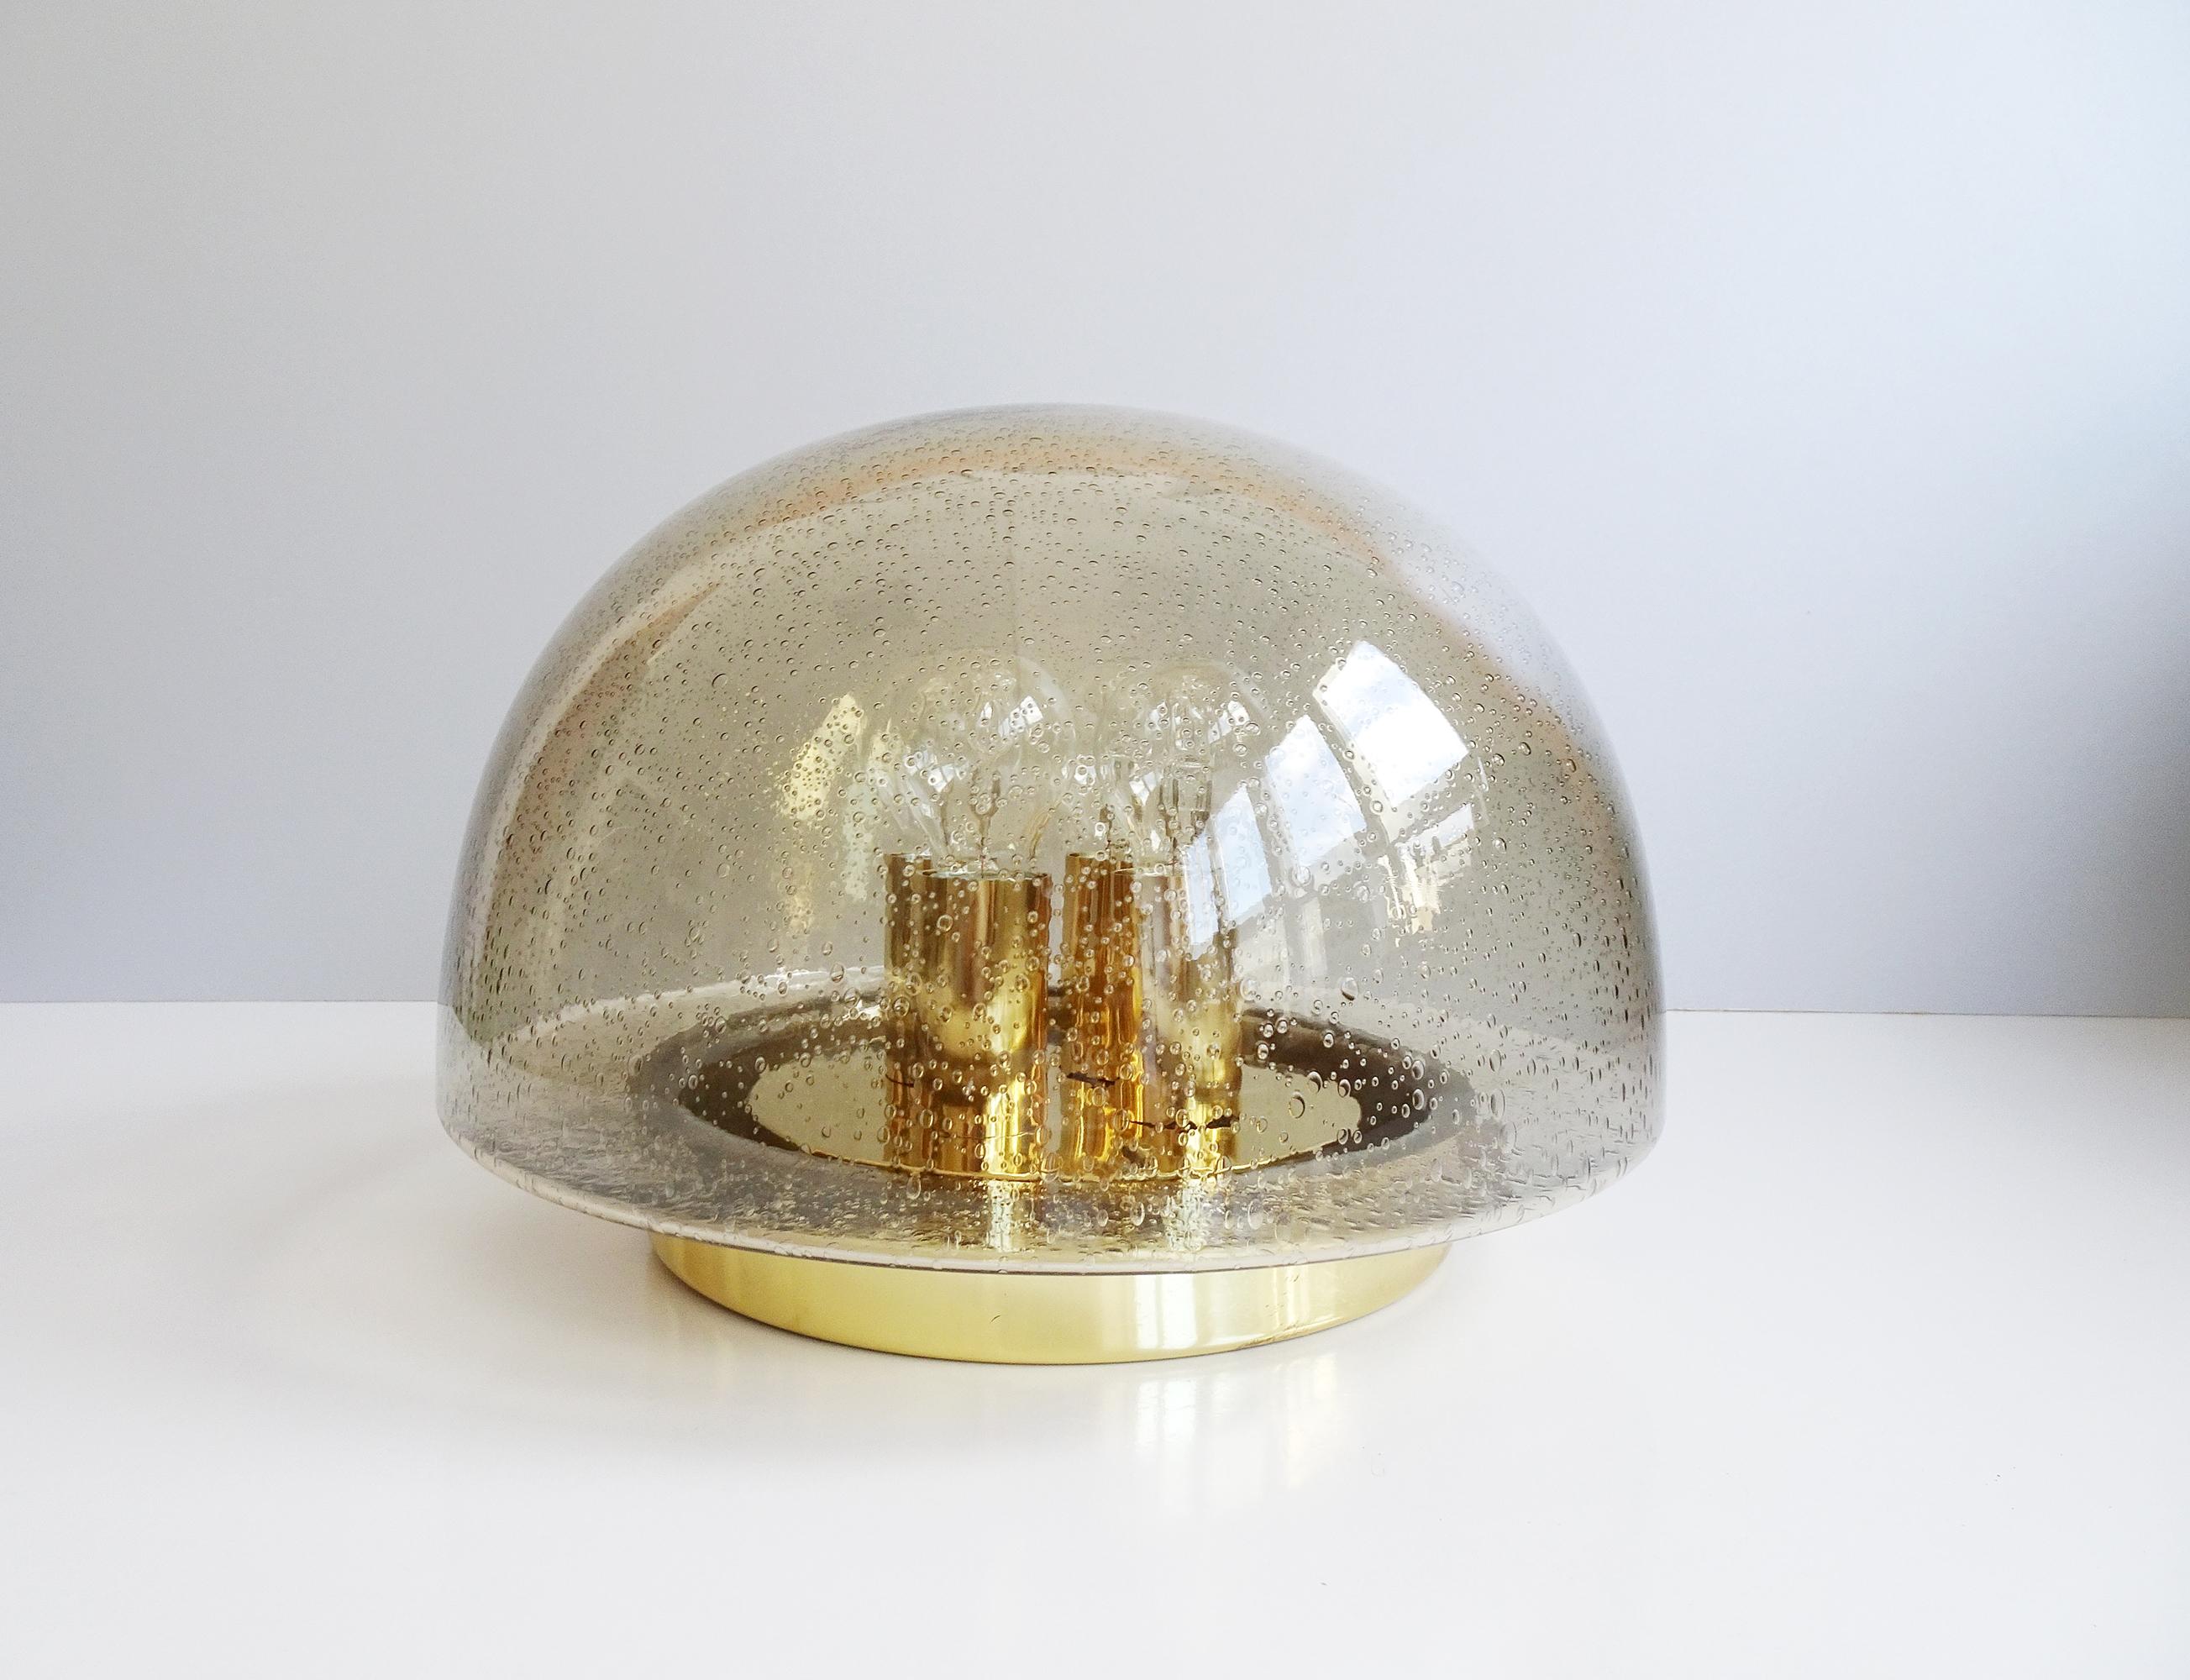 This mushroom-shaped ceiling lamp was manufactured by Glashütte Limburg in the 1960s / 1970s. The amber glass shade with air pockets is a great contrast to the brass base in gold. The air inclusions create a special play of light.

Lamp socket for